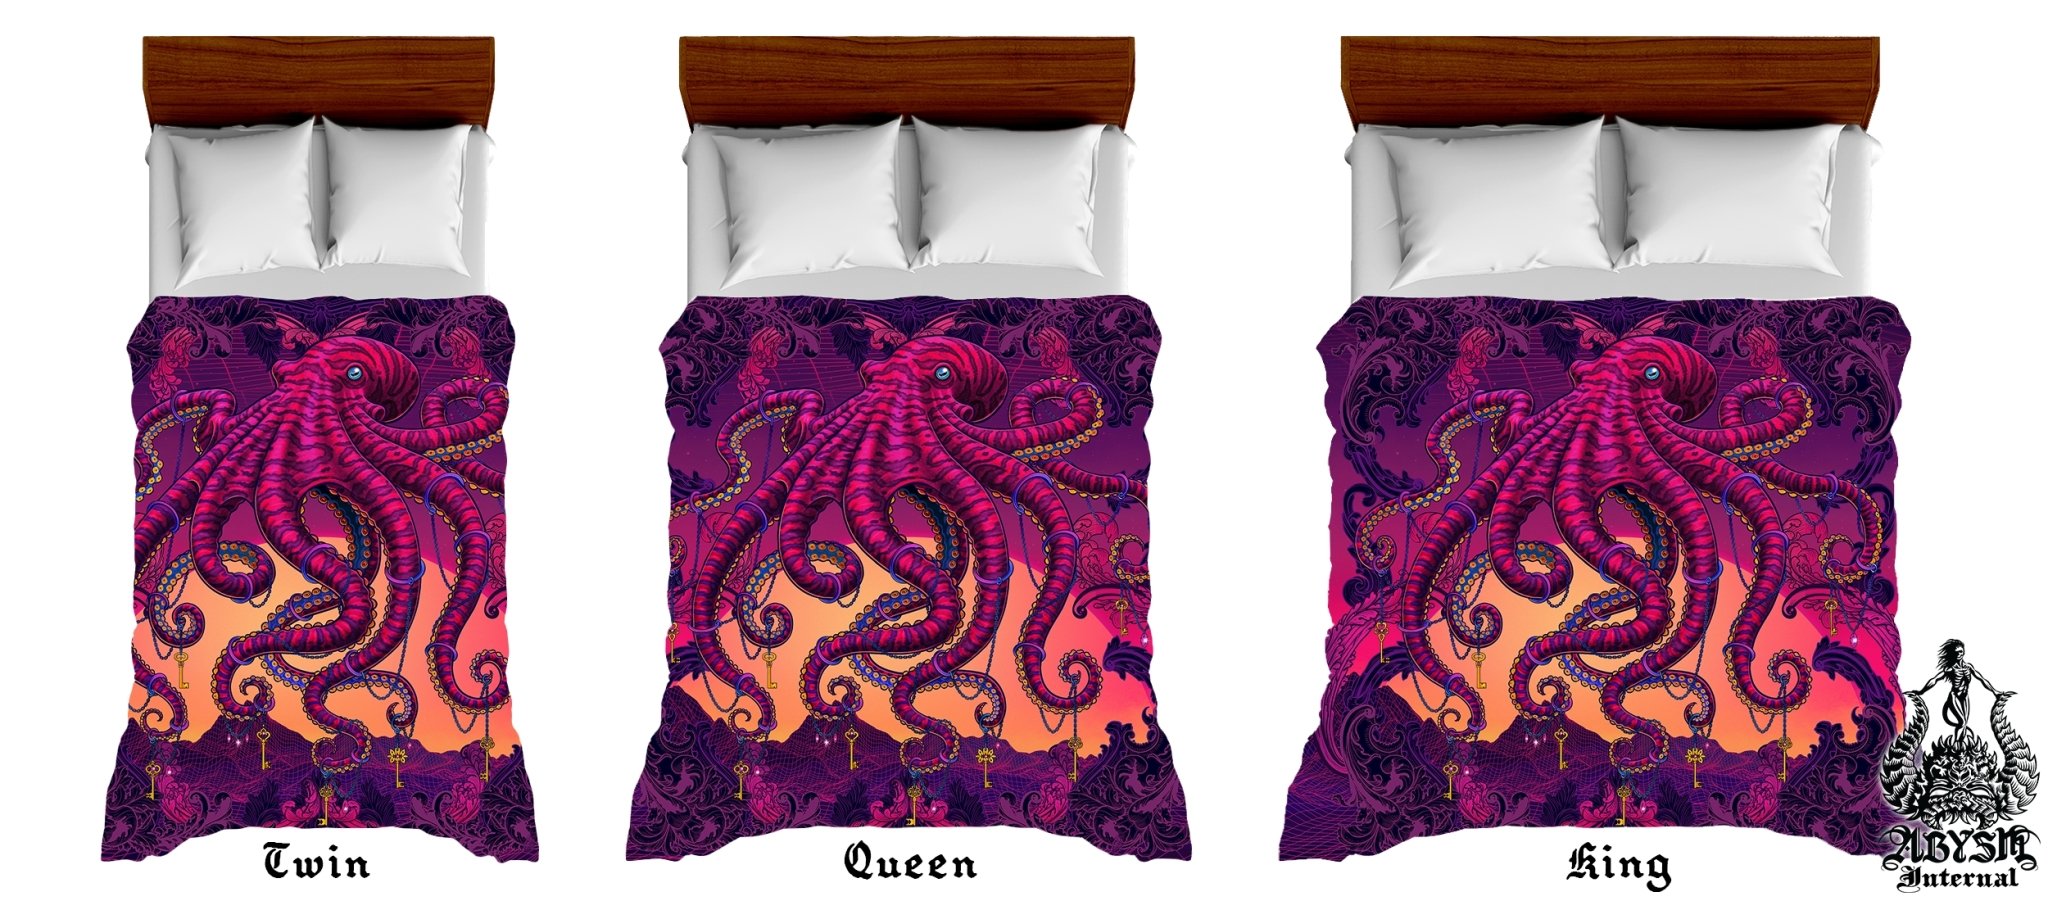 Vaporwave Bedding Set, Comforter and Duvet, Synthwave Bed Cover and Retrowave Bedroom Decor, King, Queen and Twin Size, Gamer Kids 80s Room - Psychedelic Octopus - Abysm Internal